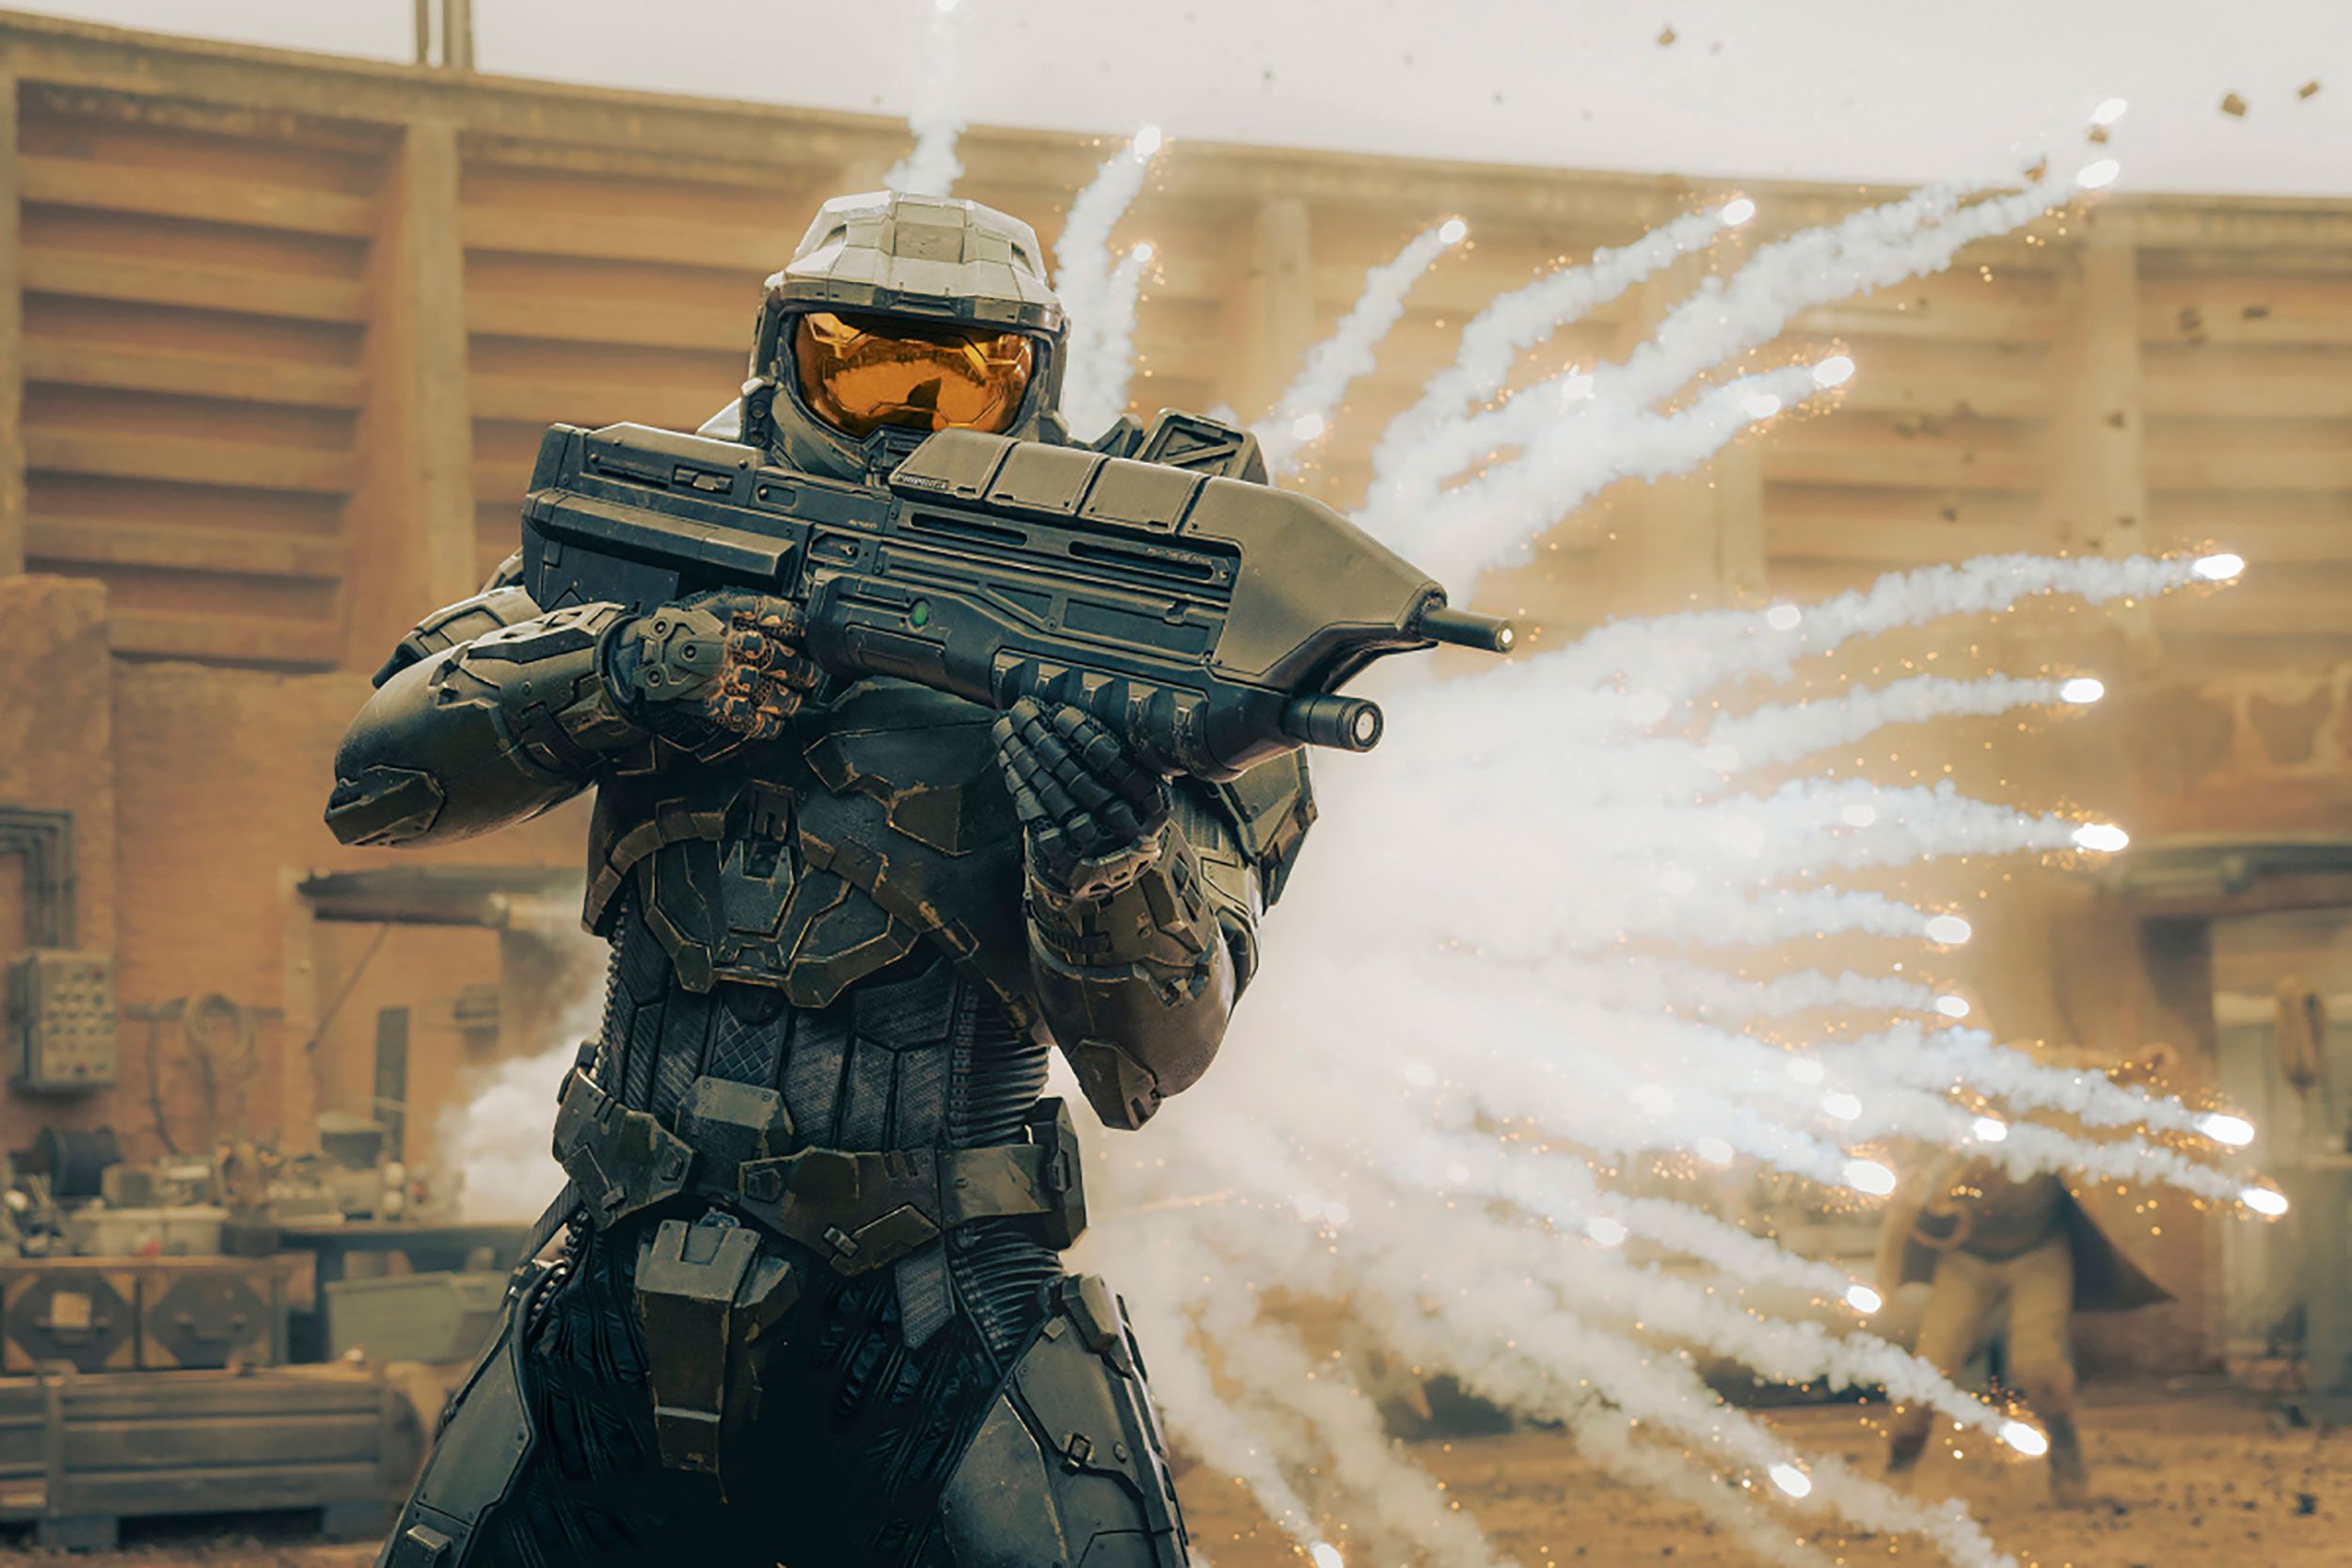 Halo review – hit sci-fi game morphs into middling $200m TV series, US  television